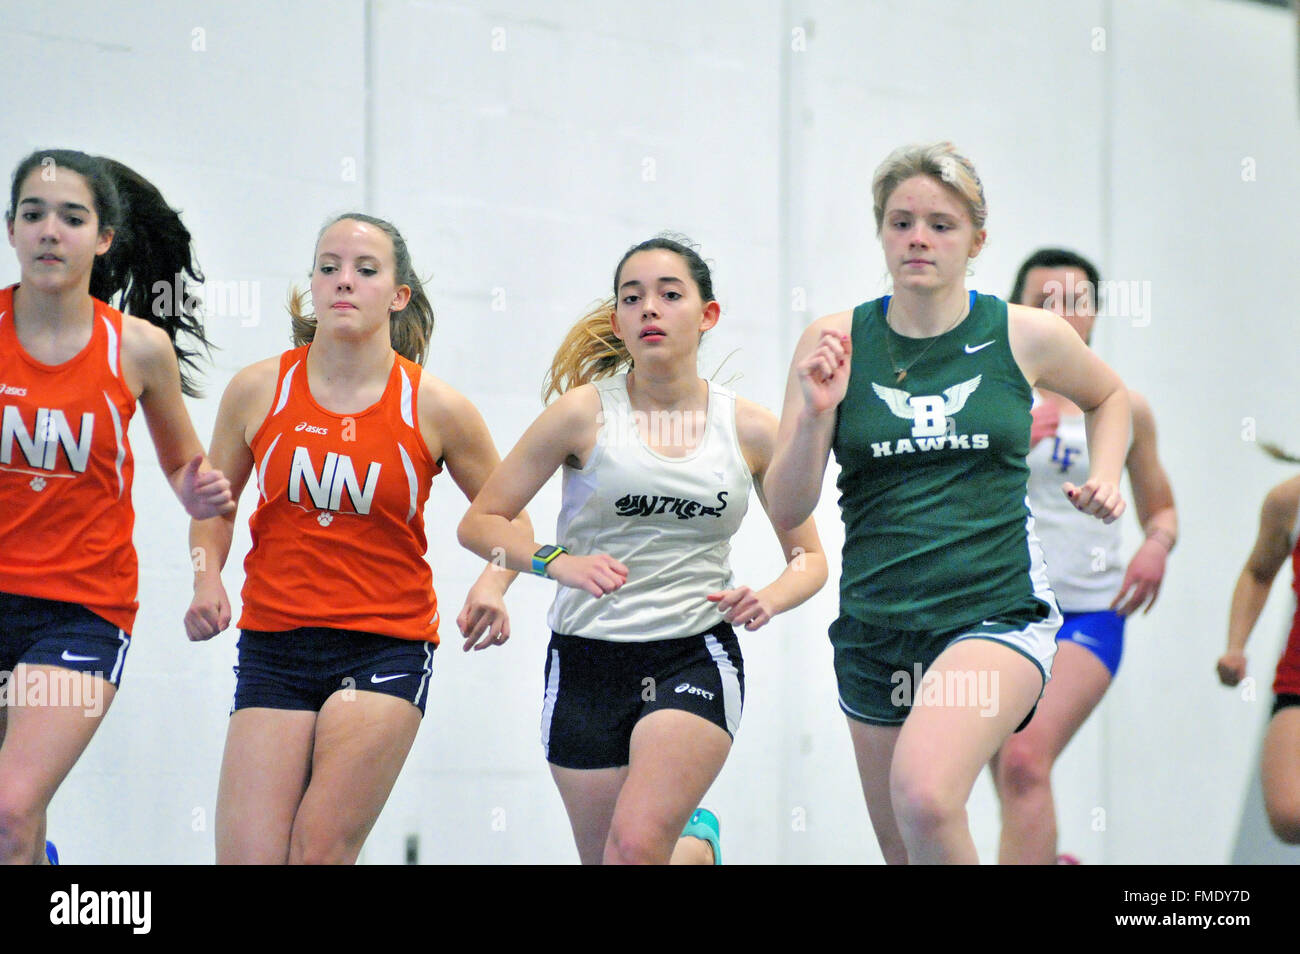 Group of runners respond to the starter's gun as they begin the 3200-meter run during an indoor high school meet. USA. Stock Photo